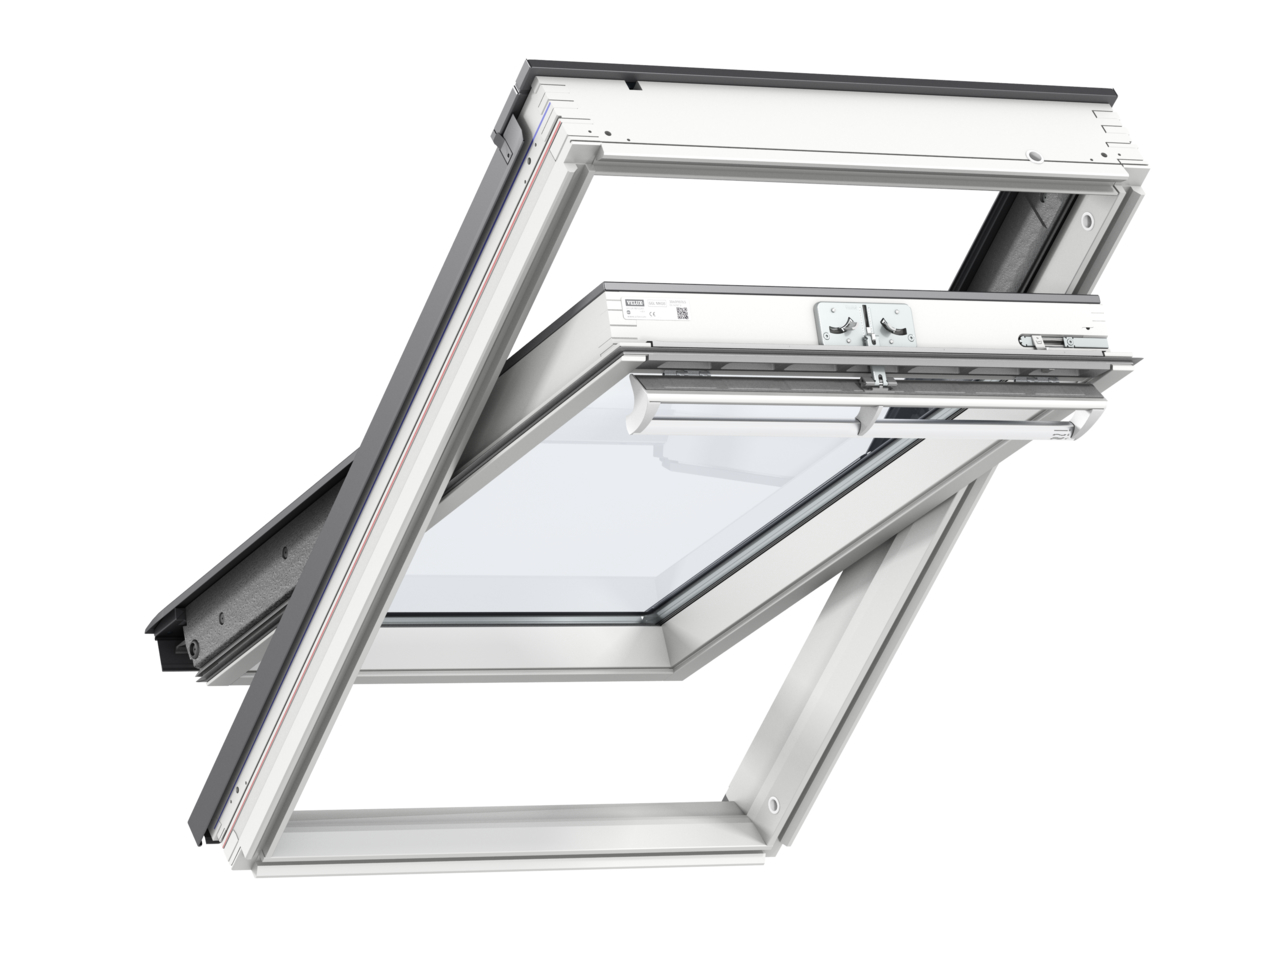 Velux GGL SK06 1140 x 1180mm Centre Pivot 66 Pane Roof Window - White Painted